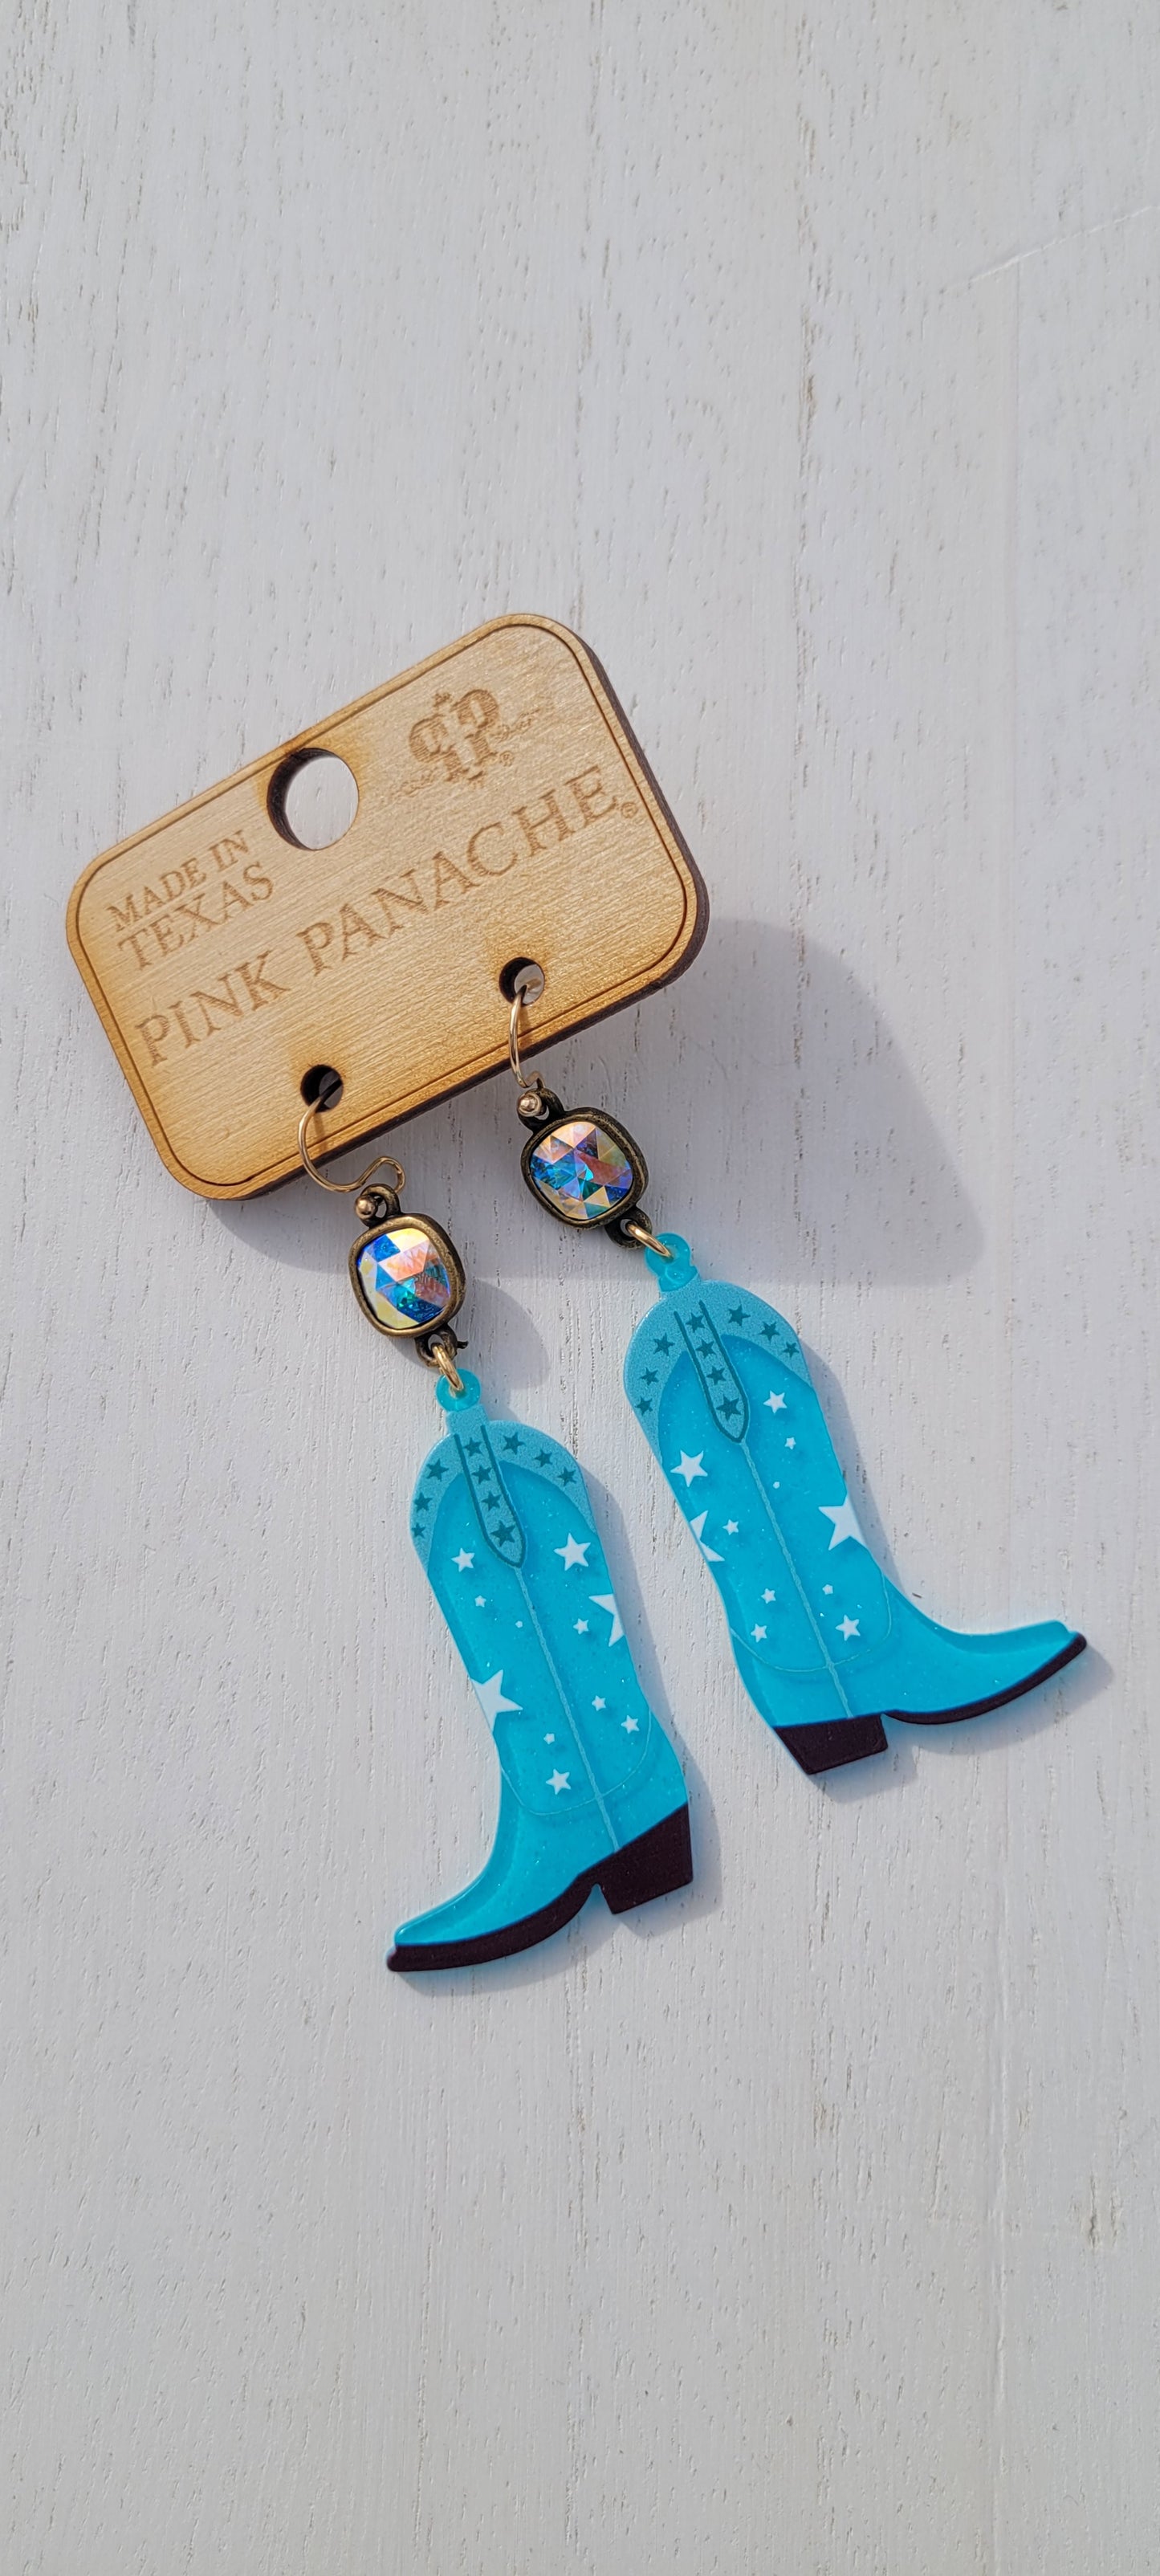 Pink Panache: Cowboy Boots Pink Panache Earrings Color: 8mm bronze/AB cushion cut connector on turquoise acrylic boot earring Limited supply! Keywords: Earrings, Jewelry